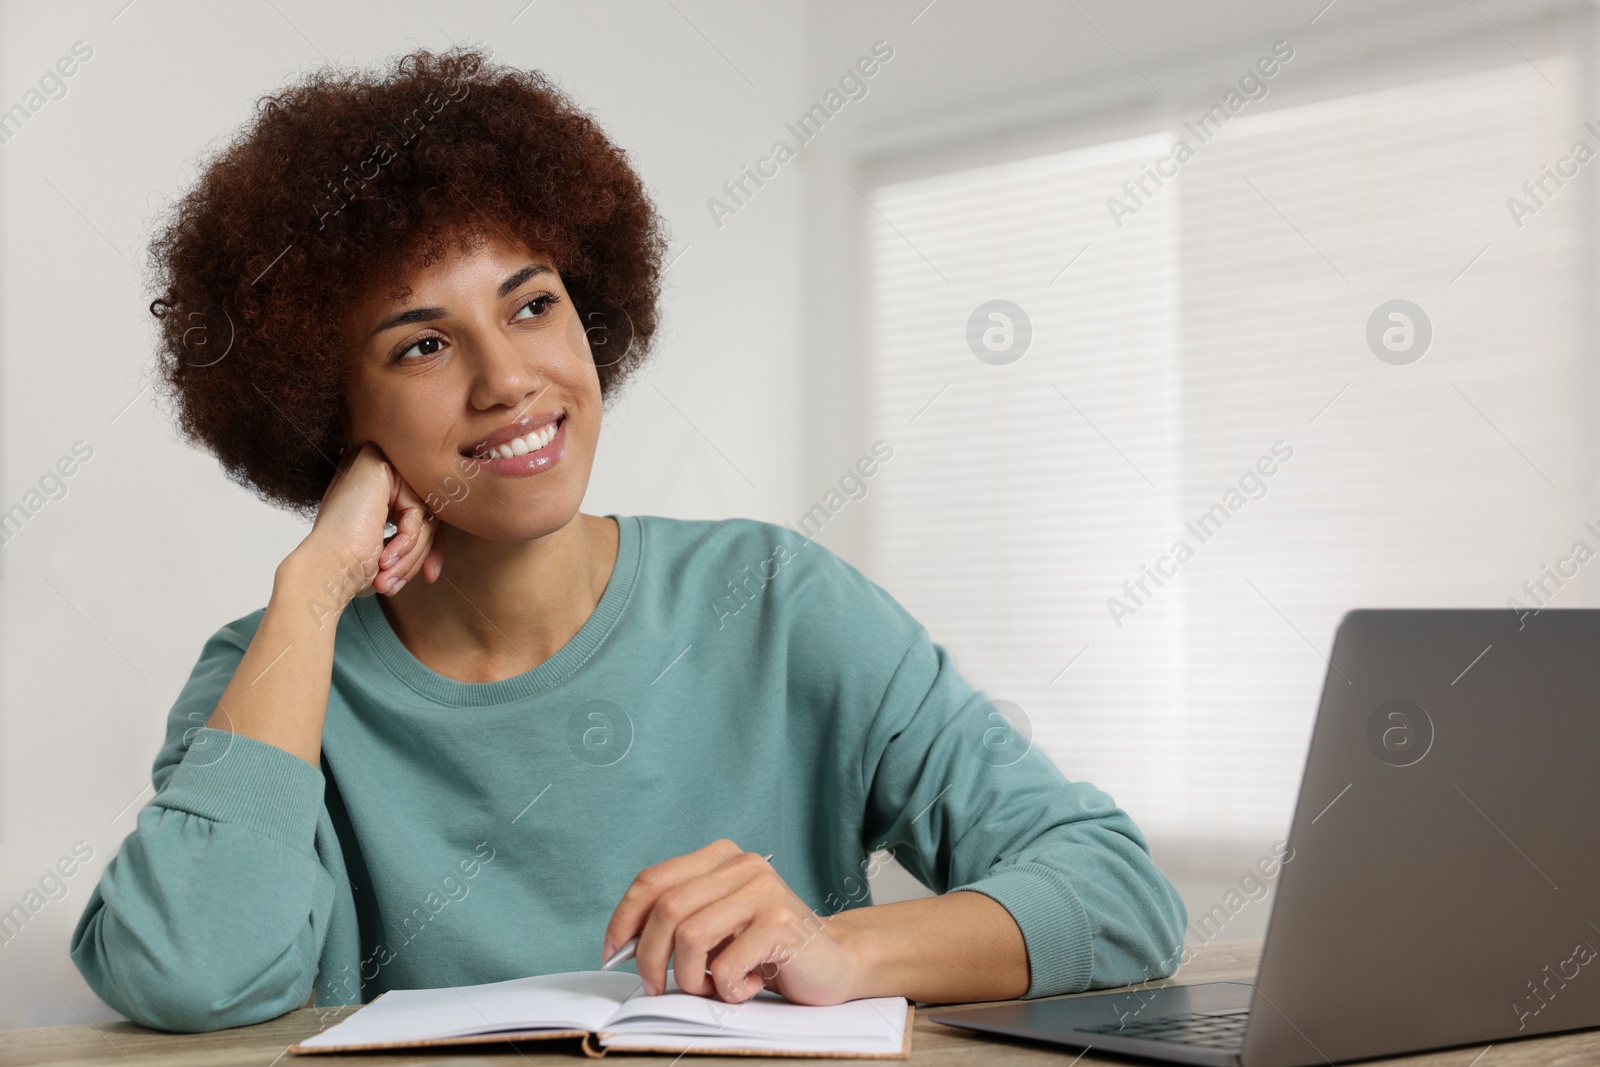 Photo of Young woman using laptop and writing in notebook at wooden desk in room